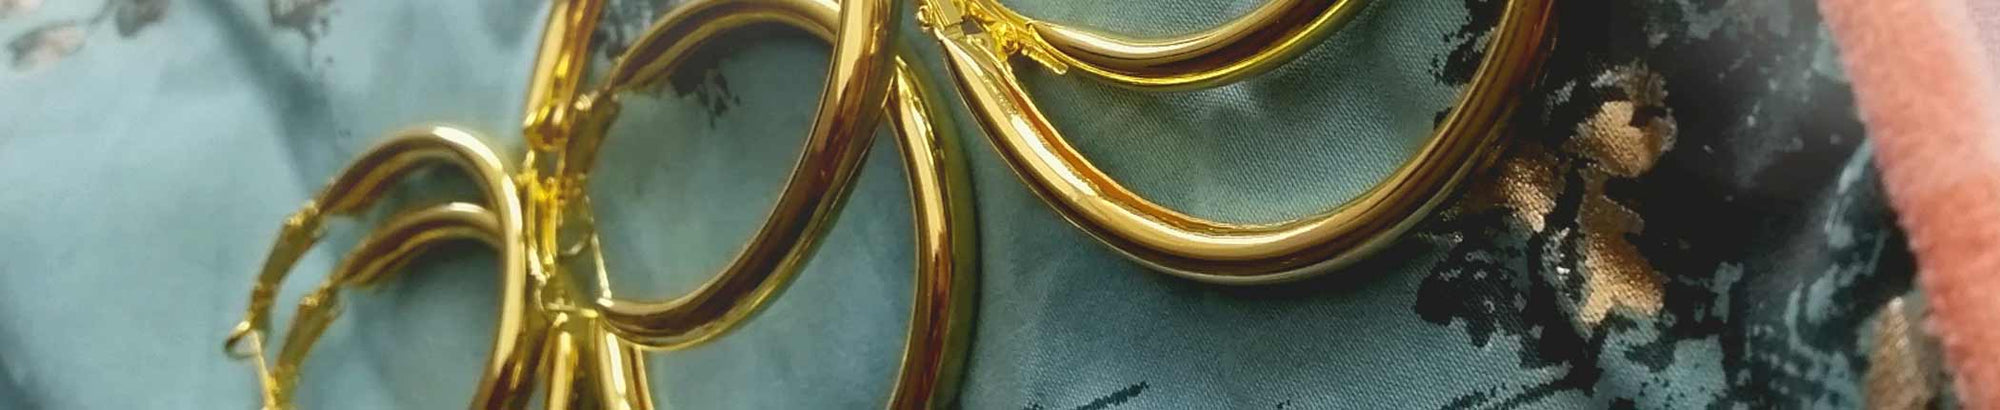 How to look after your gold hoop earrings: 10 tips